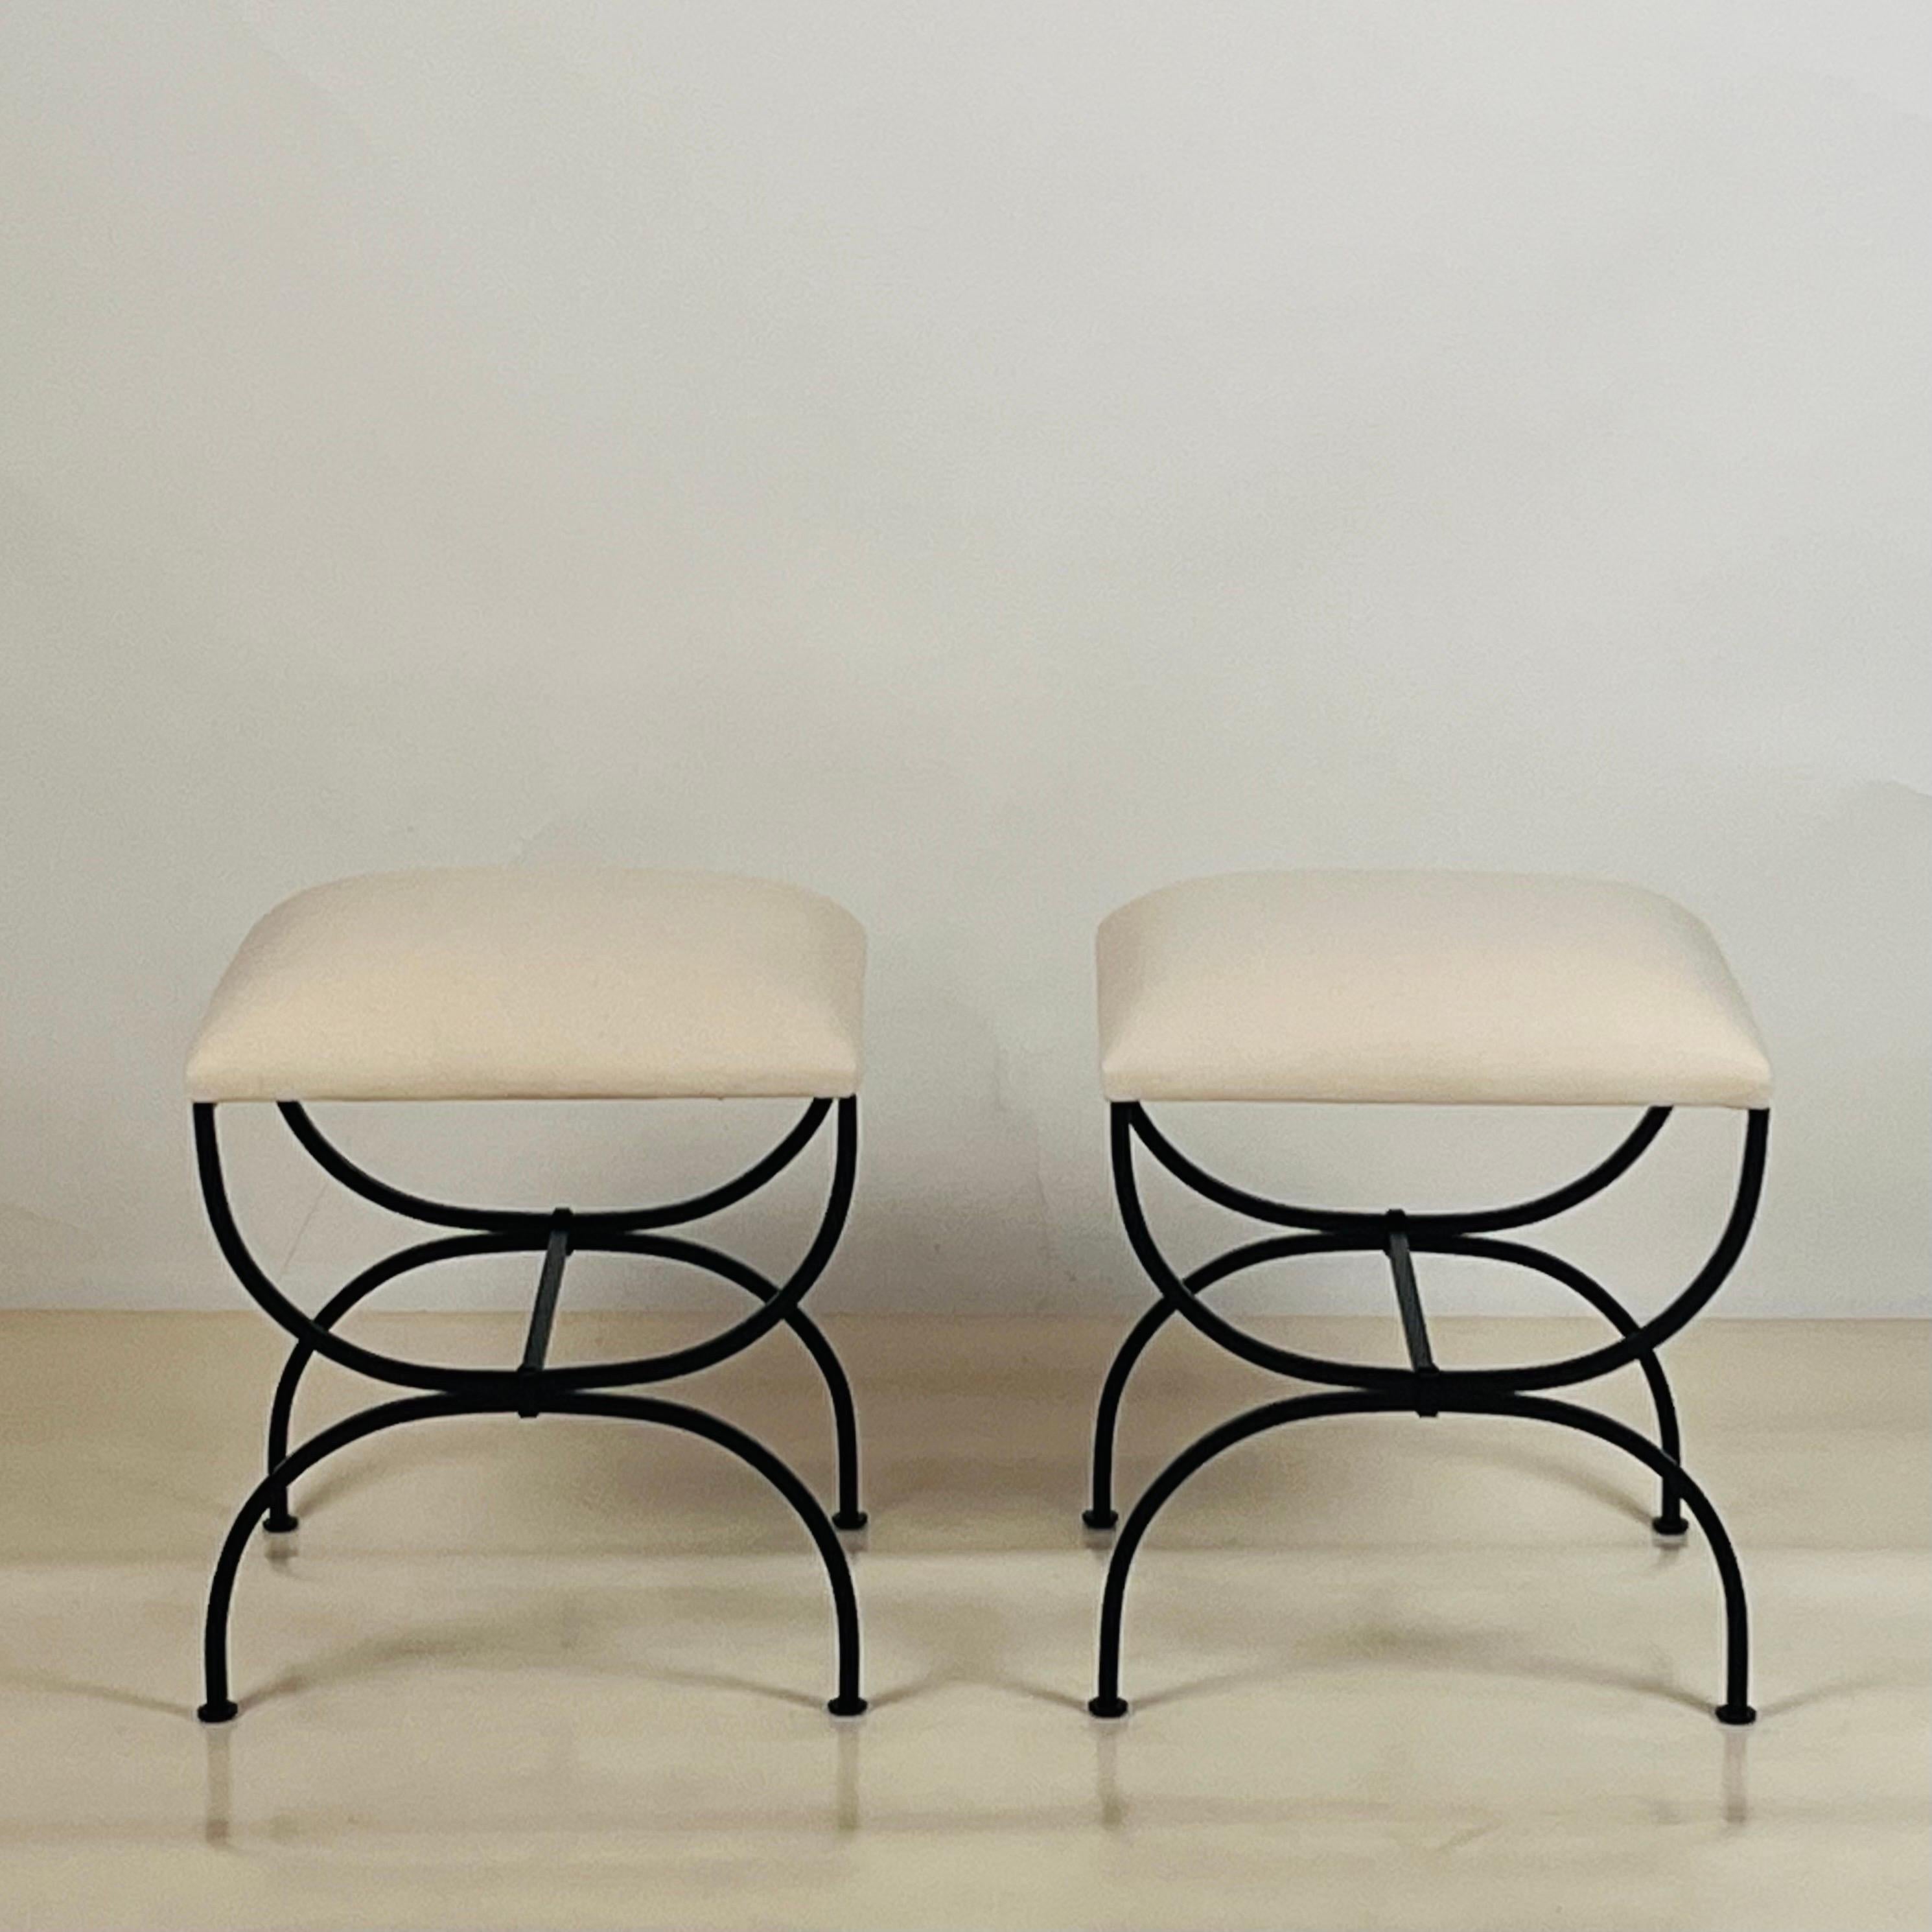 Pair of 'Strapontin' stools by Design Frères in muslin or COM.

Completed in muslin (as shown) or send 1 yard COM per stool (2 yards for the pair) to our mailing address upon completion of your order.